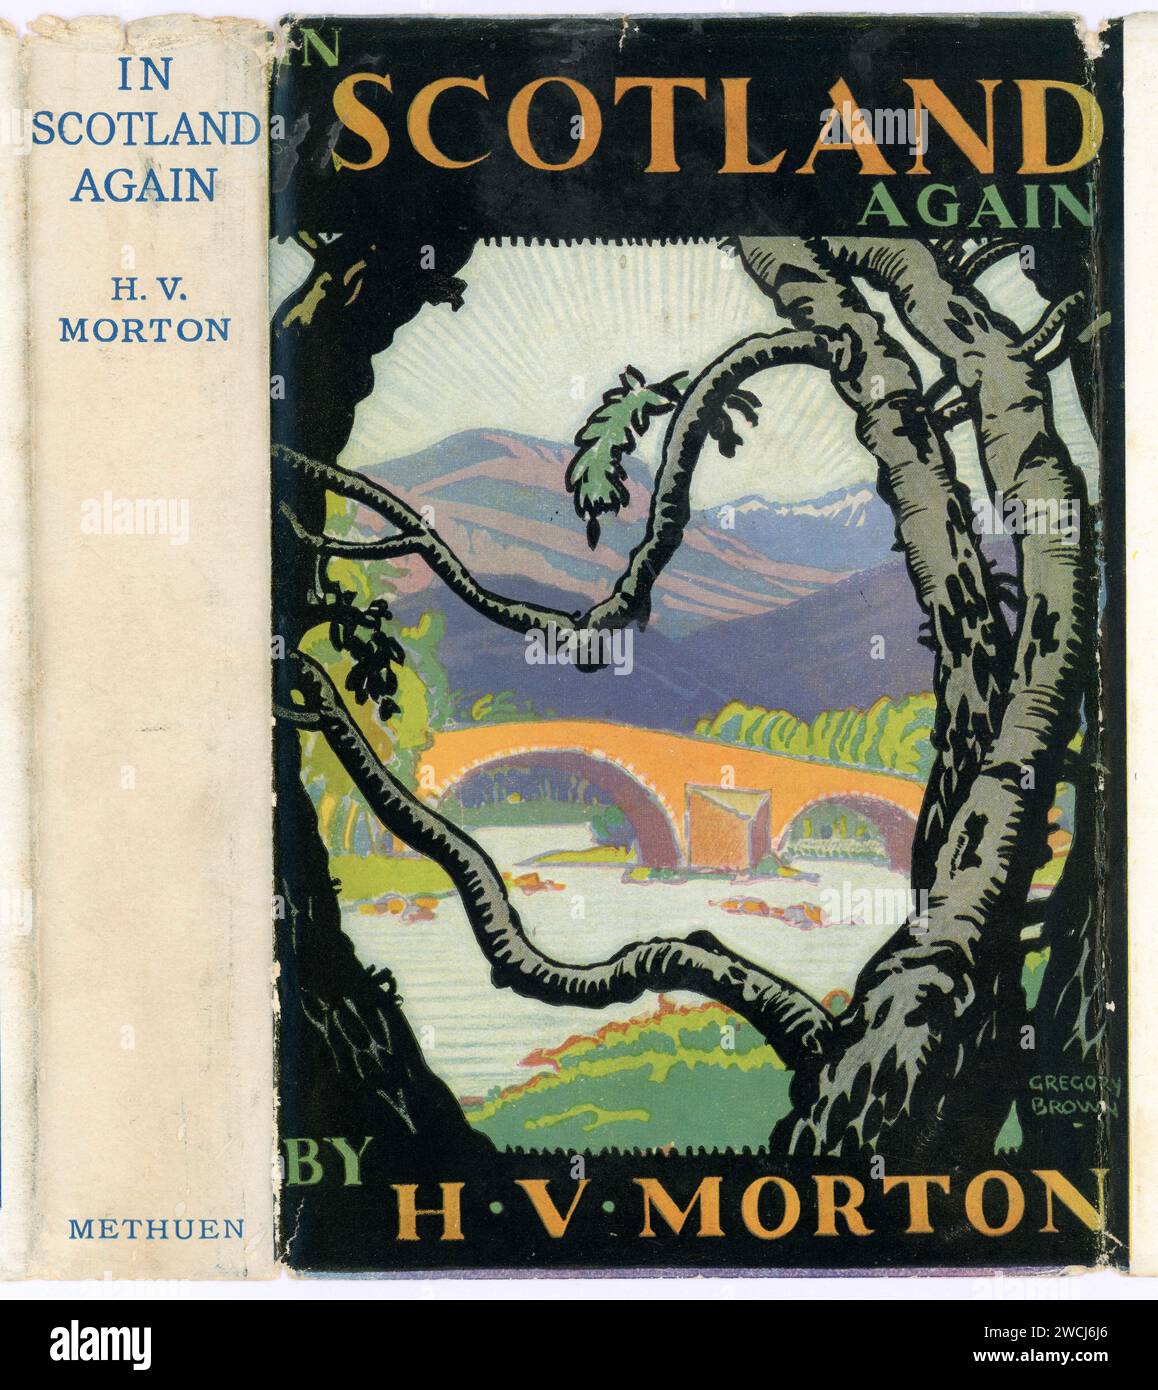 Original 1930's book jacket illustration, In Scotland Again by H. V. Morton. 11th Edition (first pub 26 Oct. 1933) illustrator is A.E. Taylor, U.K. Stock Photo